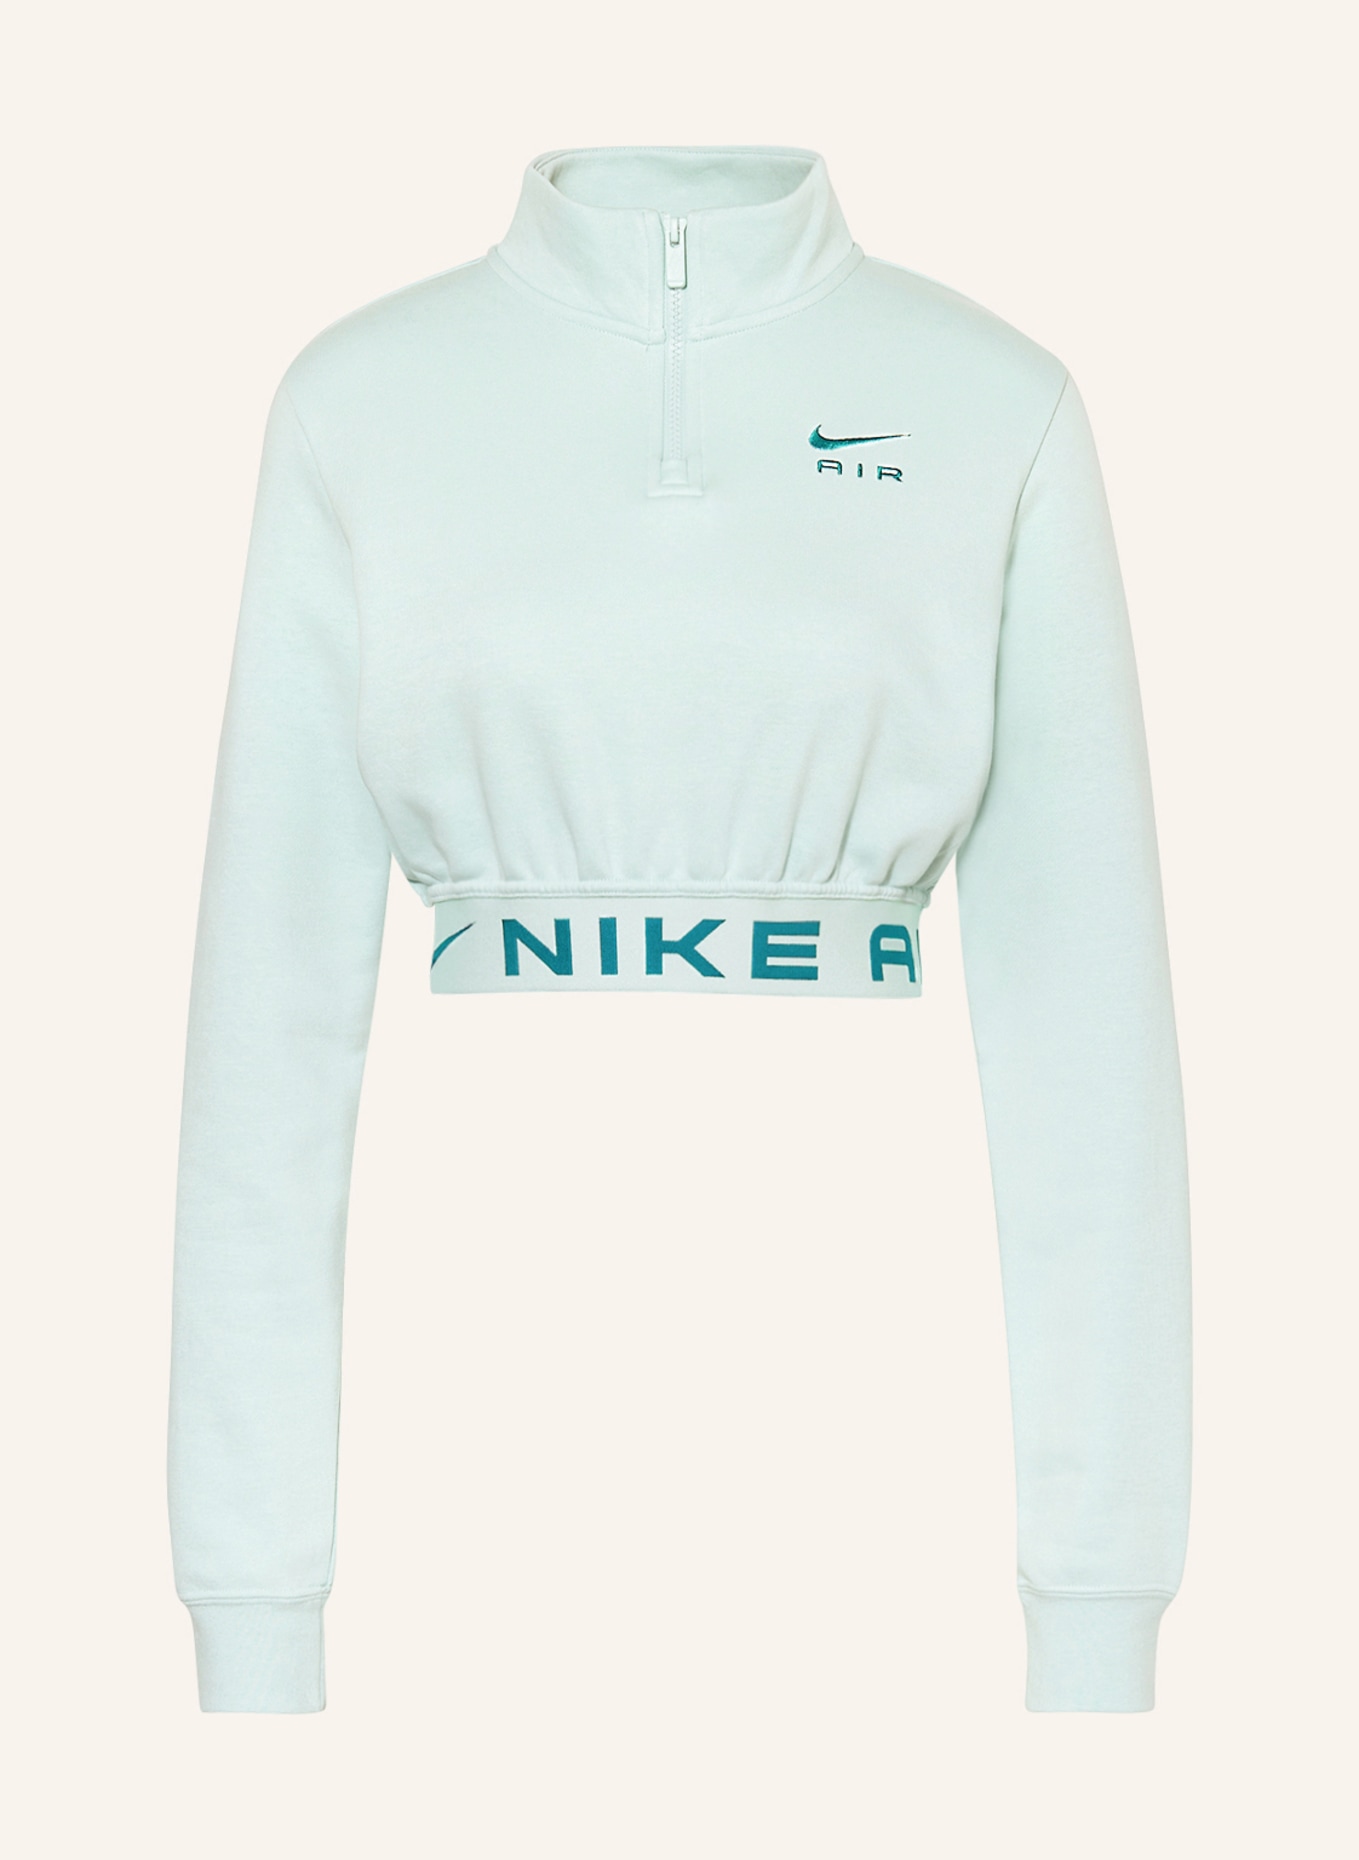 Nike Cropped half-zip sweater EXERCISE AIR made of sweatshirt fabric, Color: MINT (Image 1)